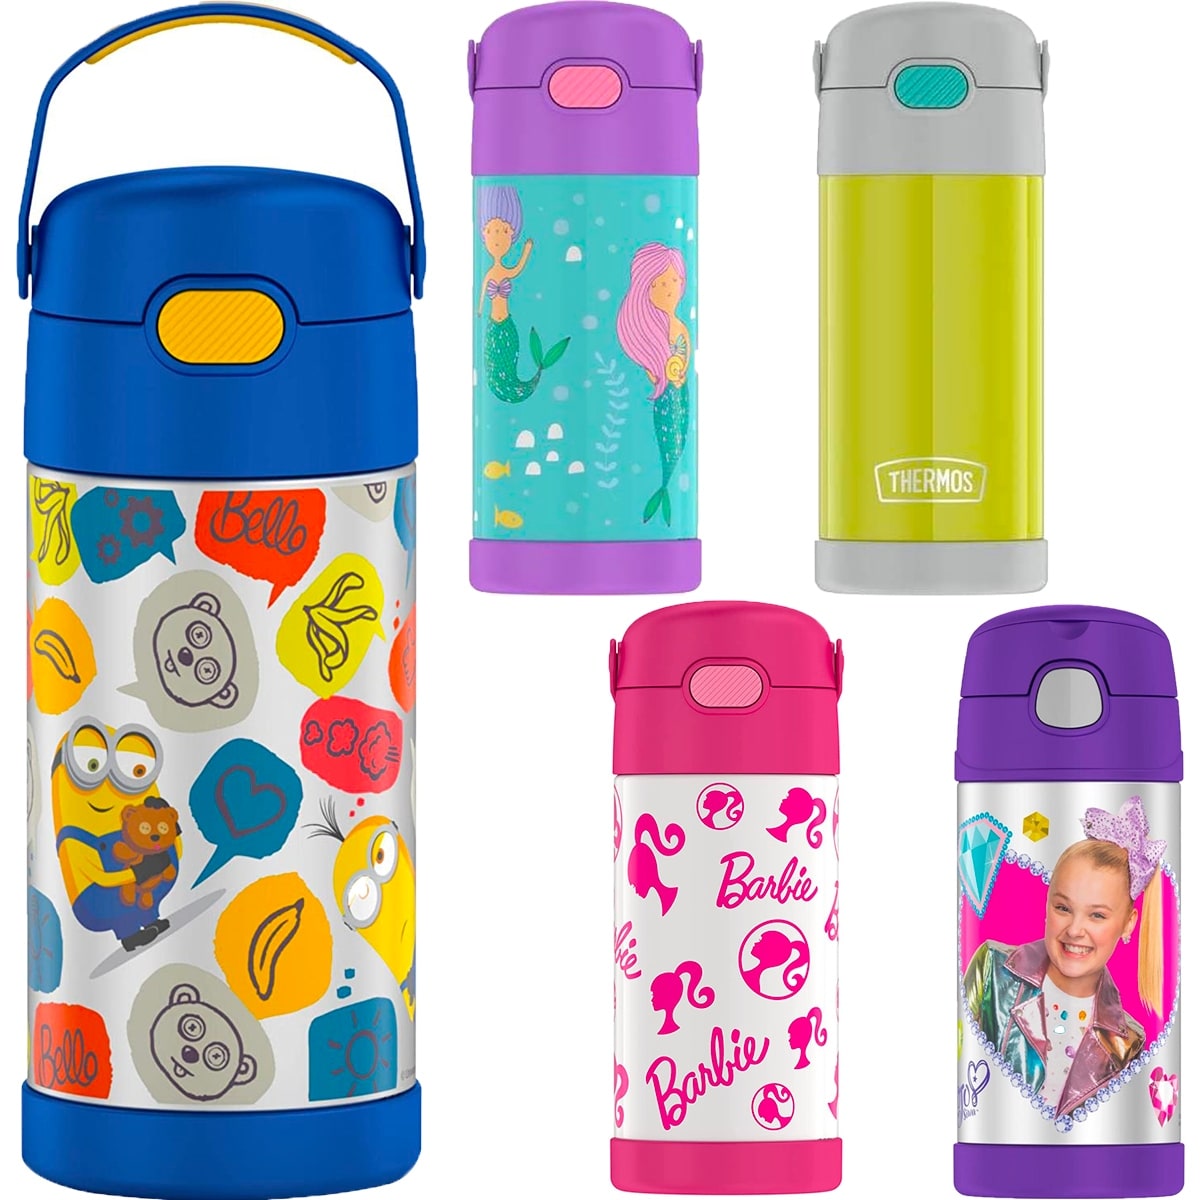 https://ak1.ostkcdn.com/images/products/is/images/direct/aca490cdf5d12c17f933b7bb18b57eb240010f54/Thermos-12-oz.-Kid%27s-Funtainer-Stainless-Steel-Bottle-w--Bail-Handle.jpg